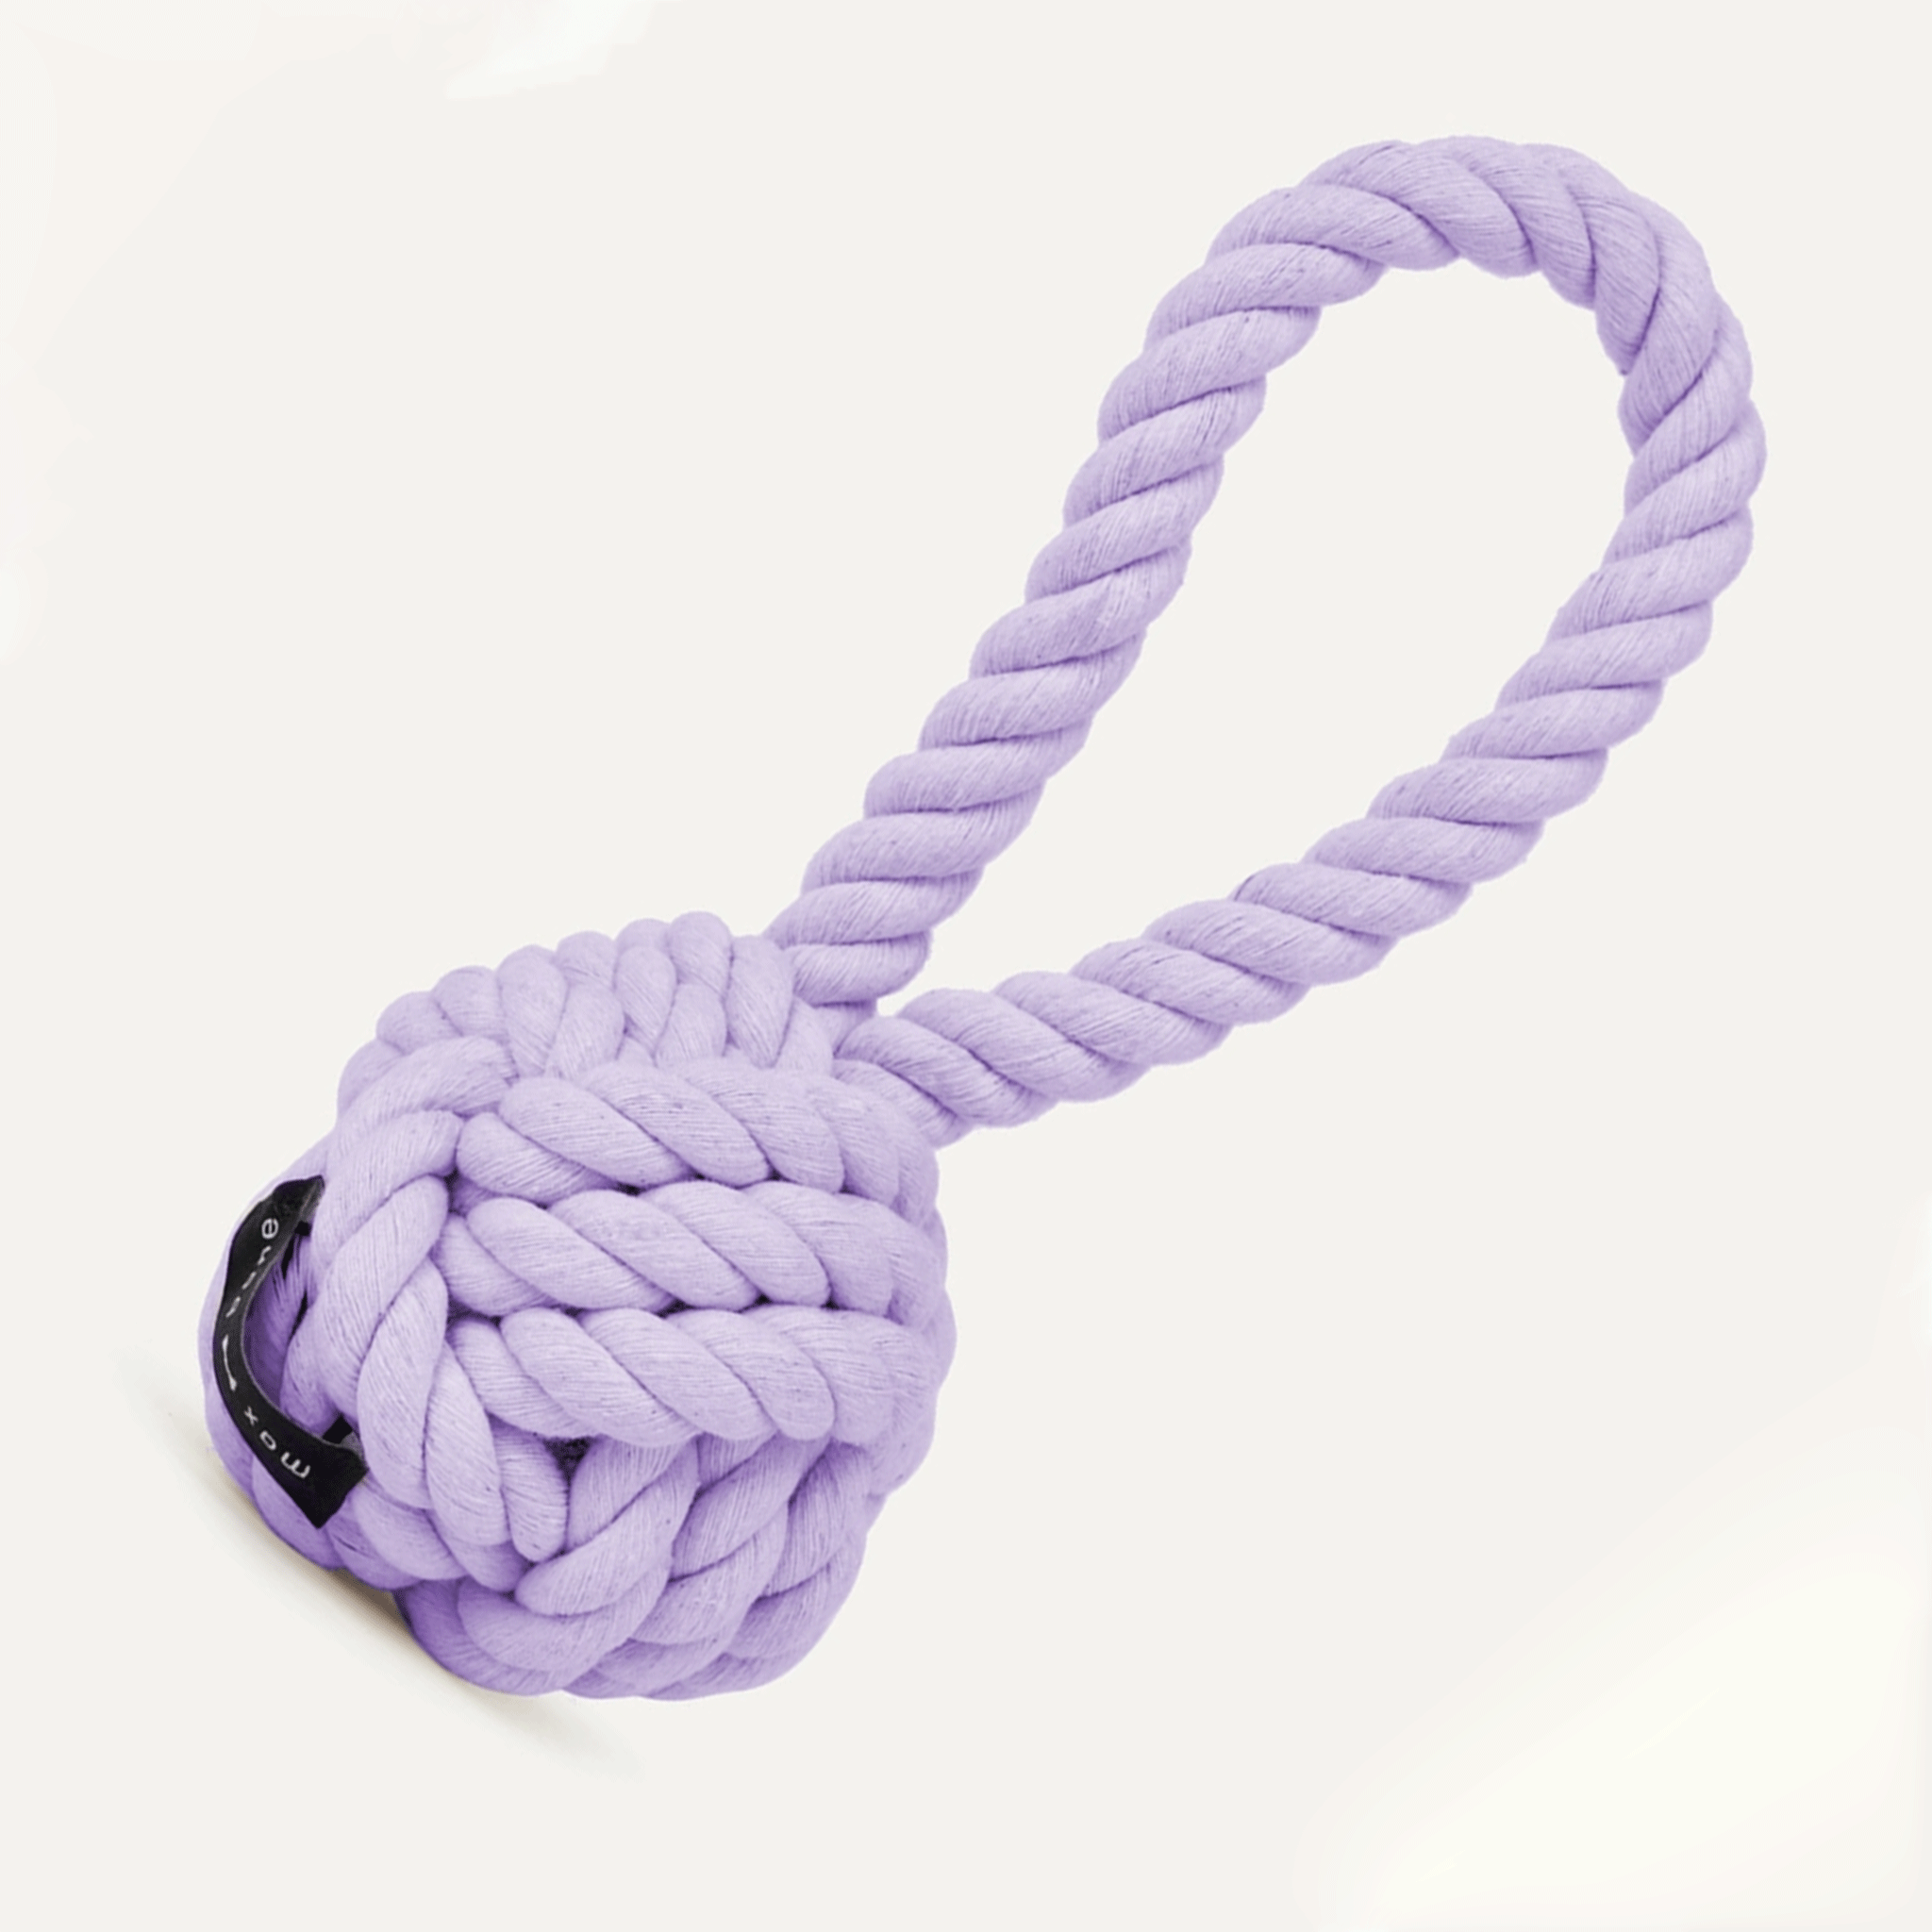 On a white background is a rope dog toy in a lavender shade. 